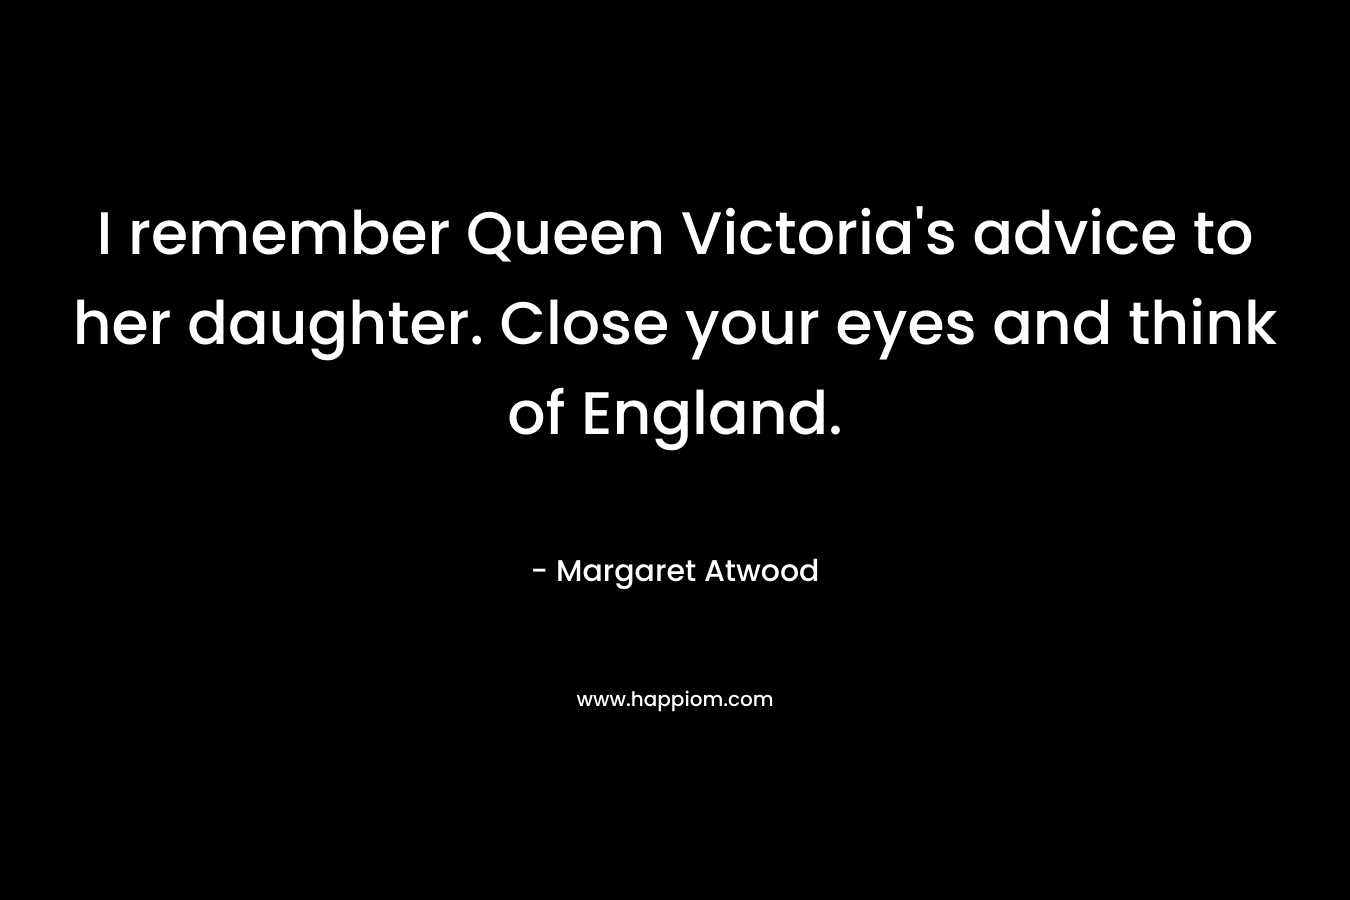 I remember Queen Victoria's advice to her daughter. Close your eyes and think of England.